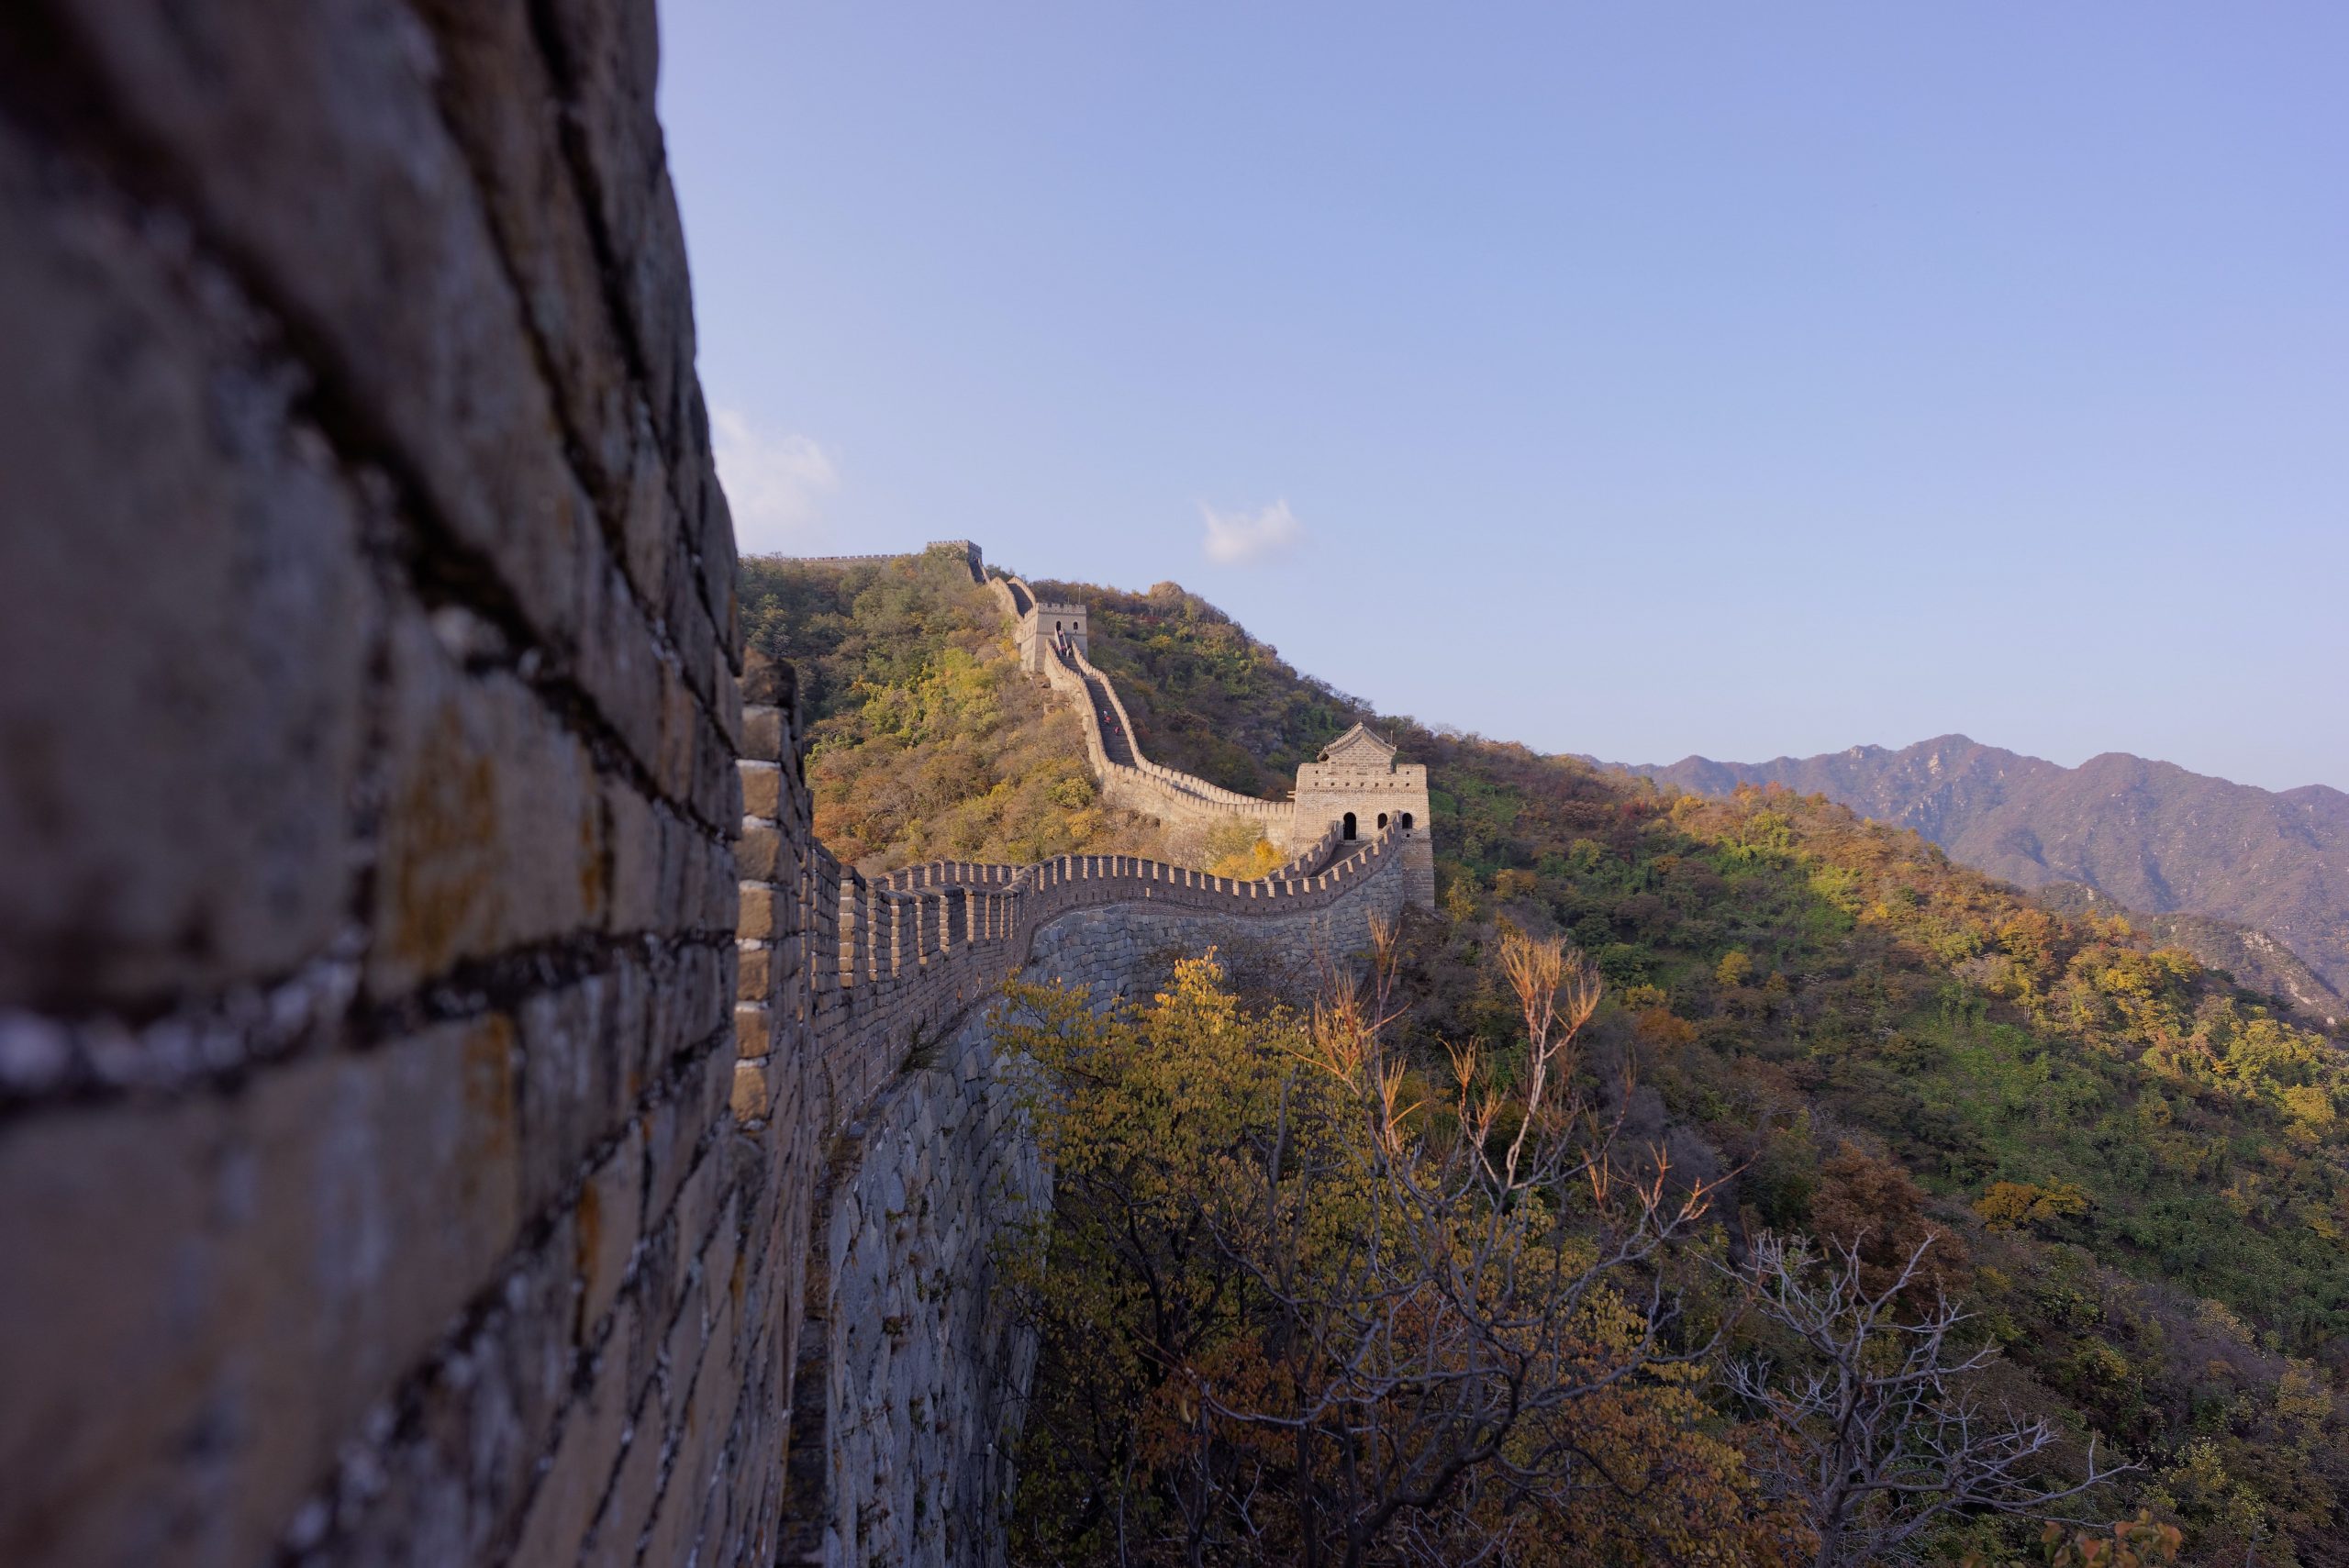 Parts of China’s Great Wall built for surveillance and not war: Study